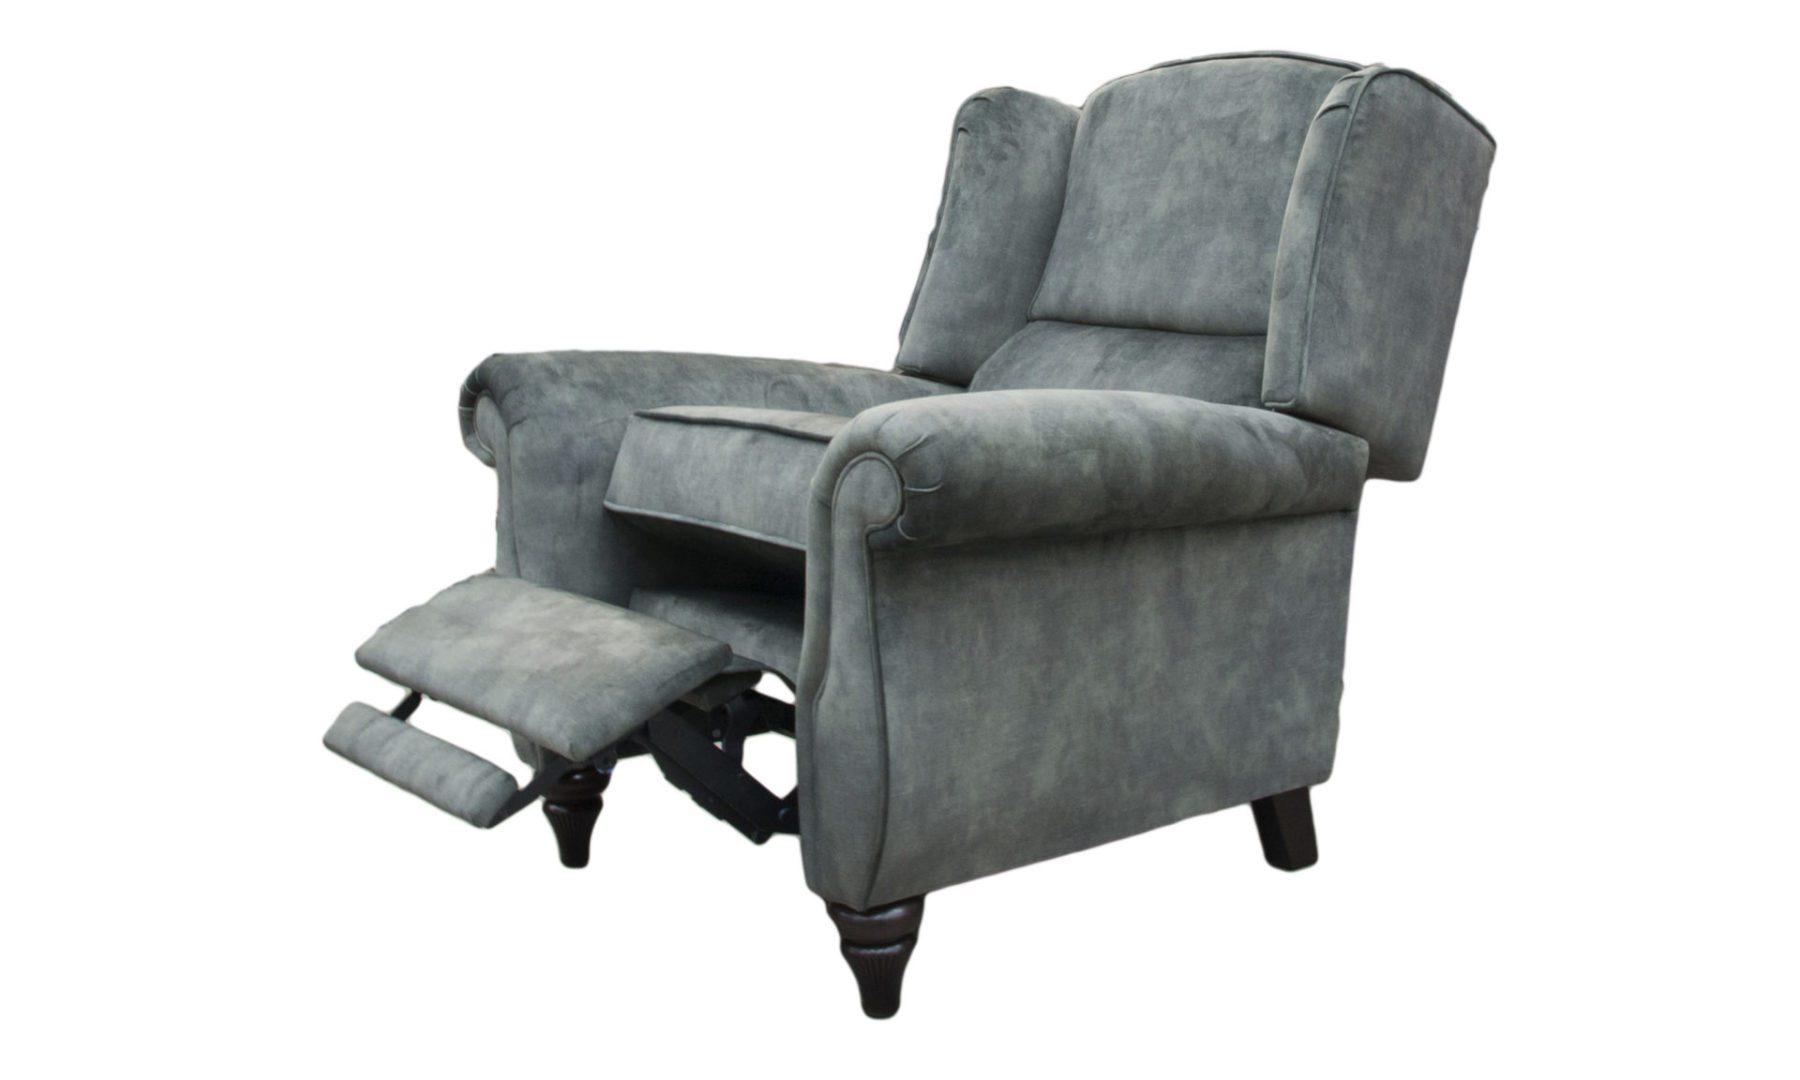 Greville Recliner Chair in Lovely Jade, Gold Collection Fabric